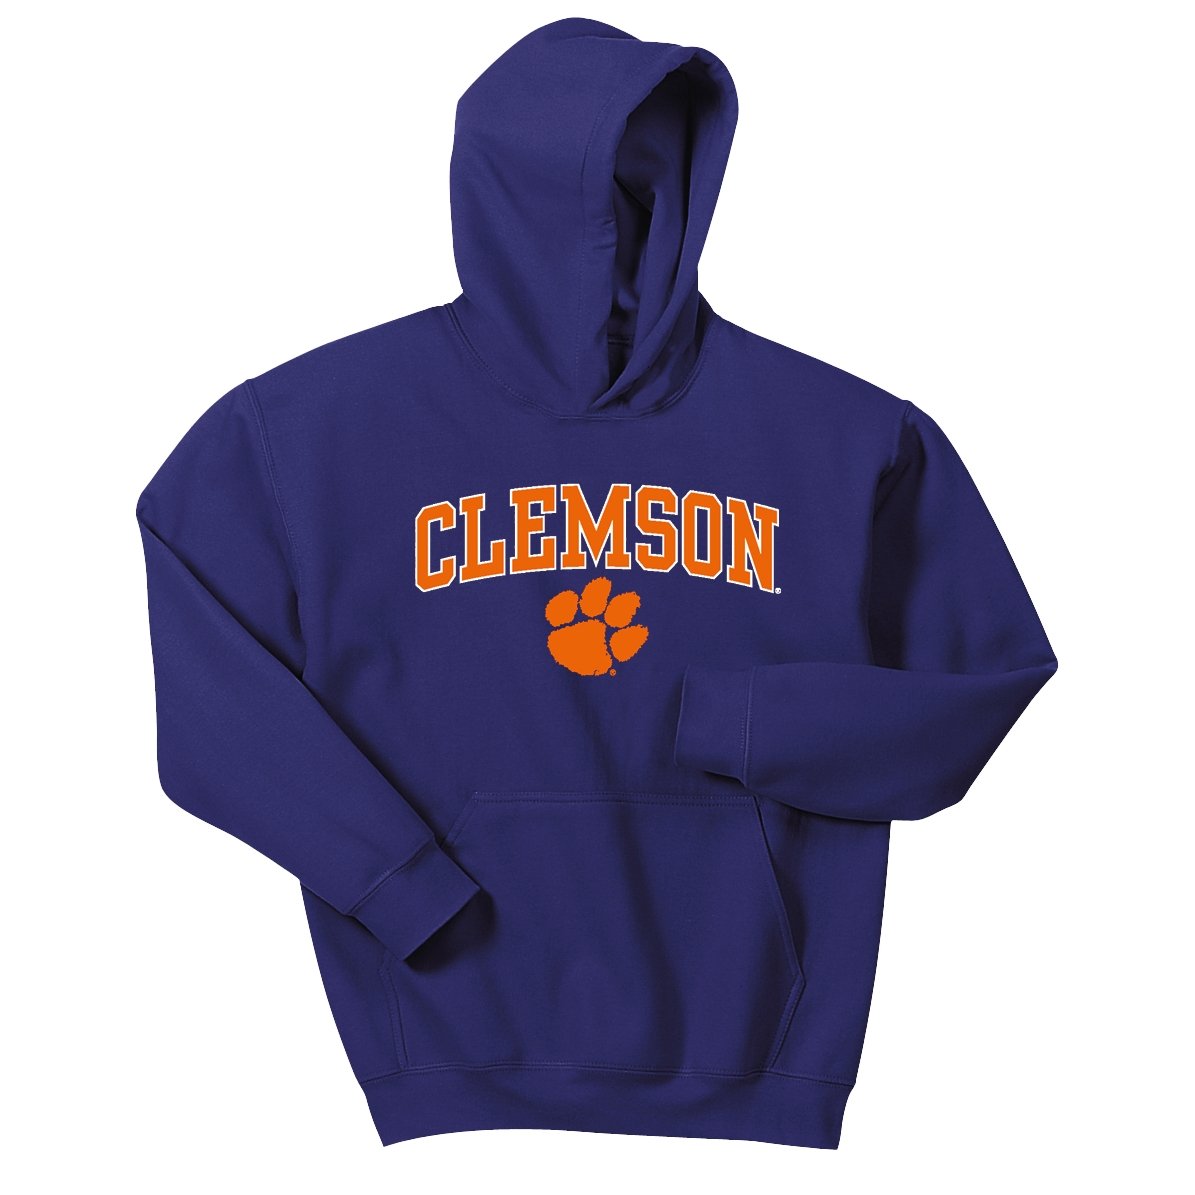 Clemson Tigers Youth Hoodie - Arch Over Paw - Mr. Knickerbocker